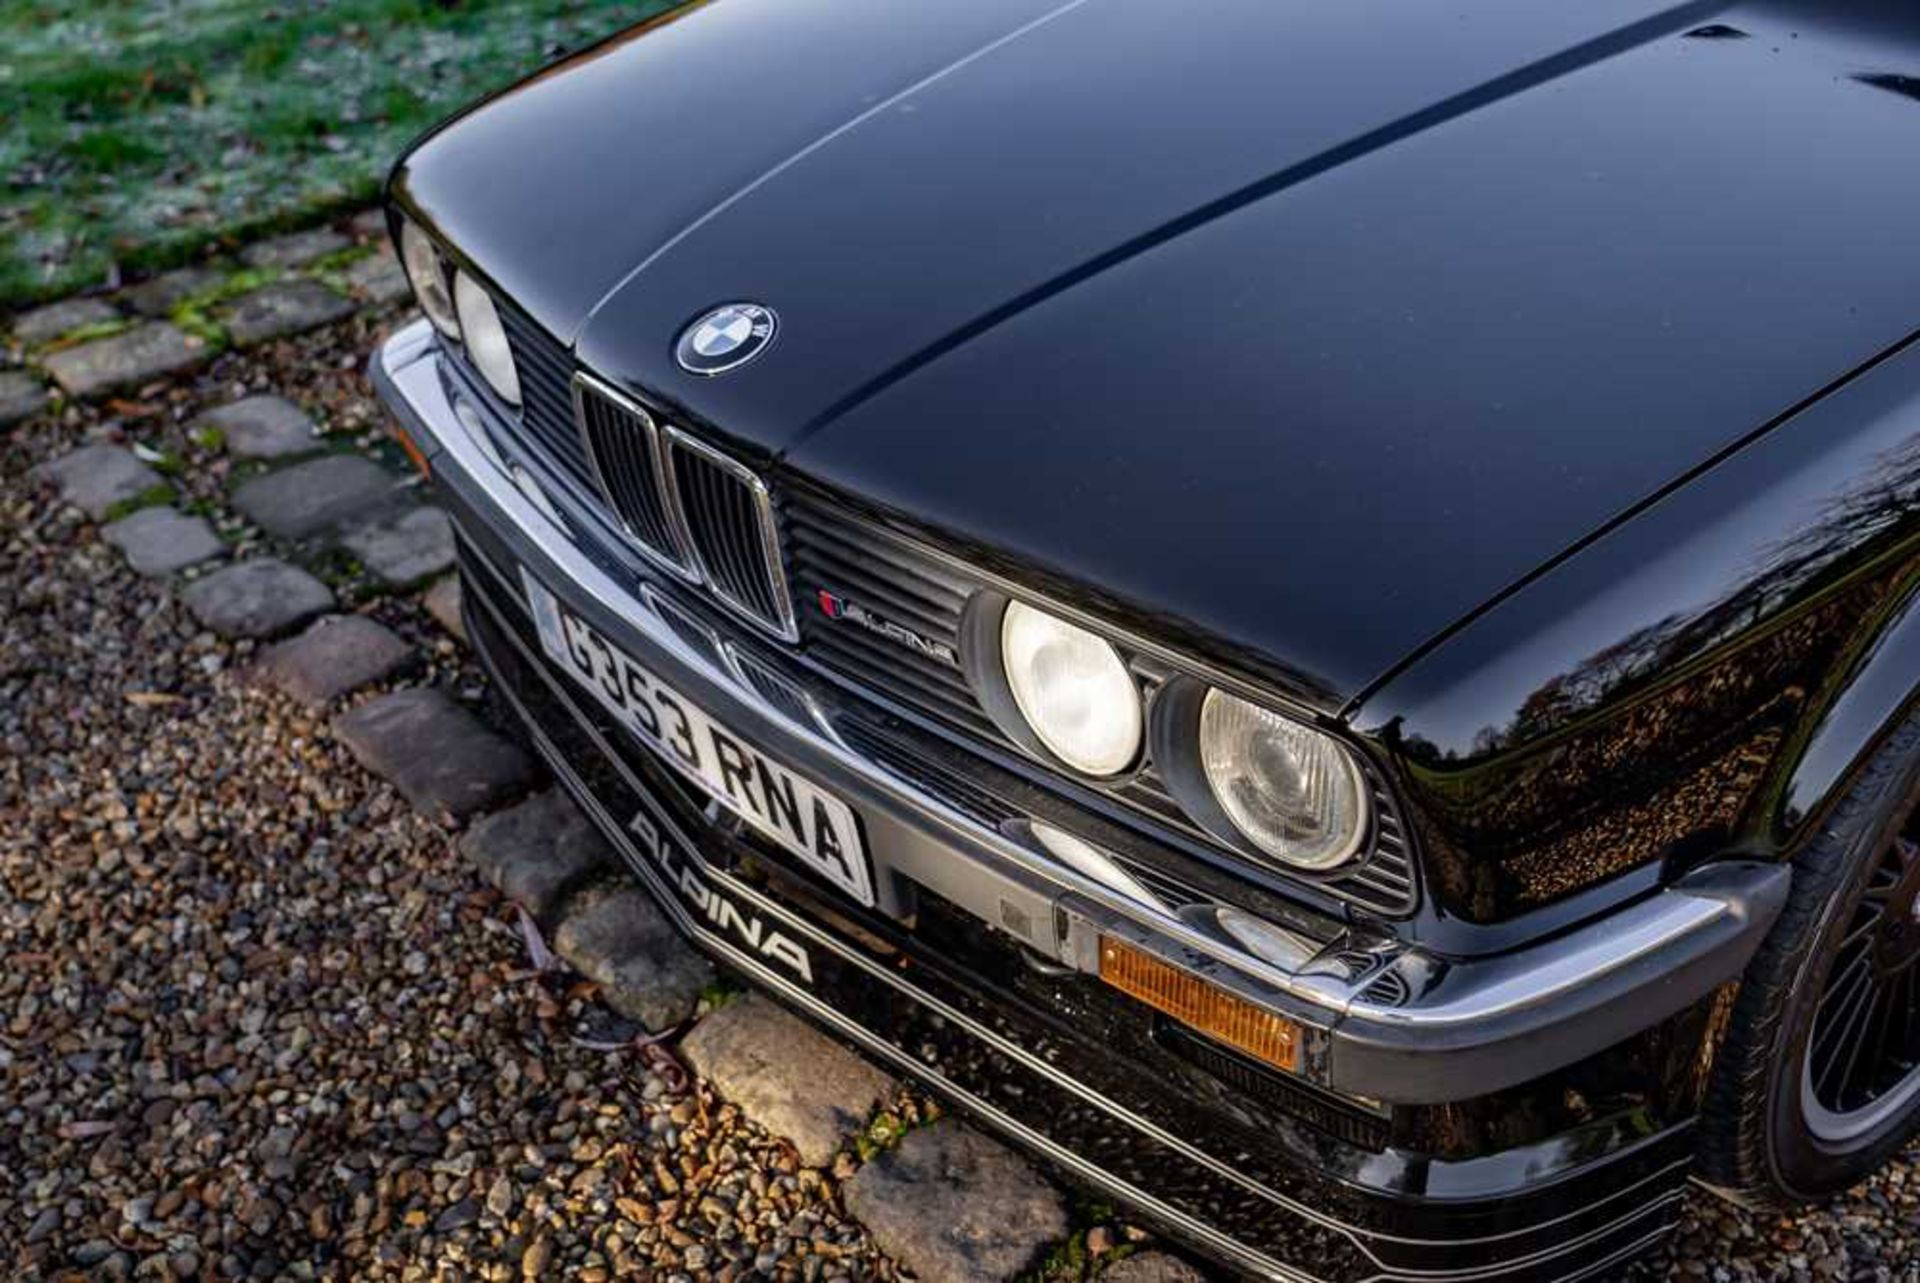 1989 BMW 320i Convertible Converted to Alpina 328i Specification - Image 18 of 51